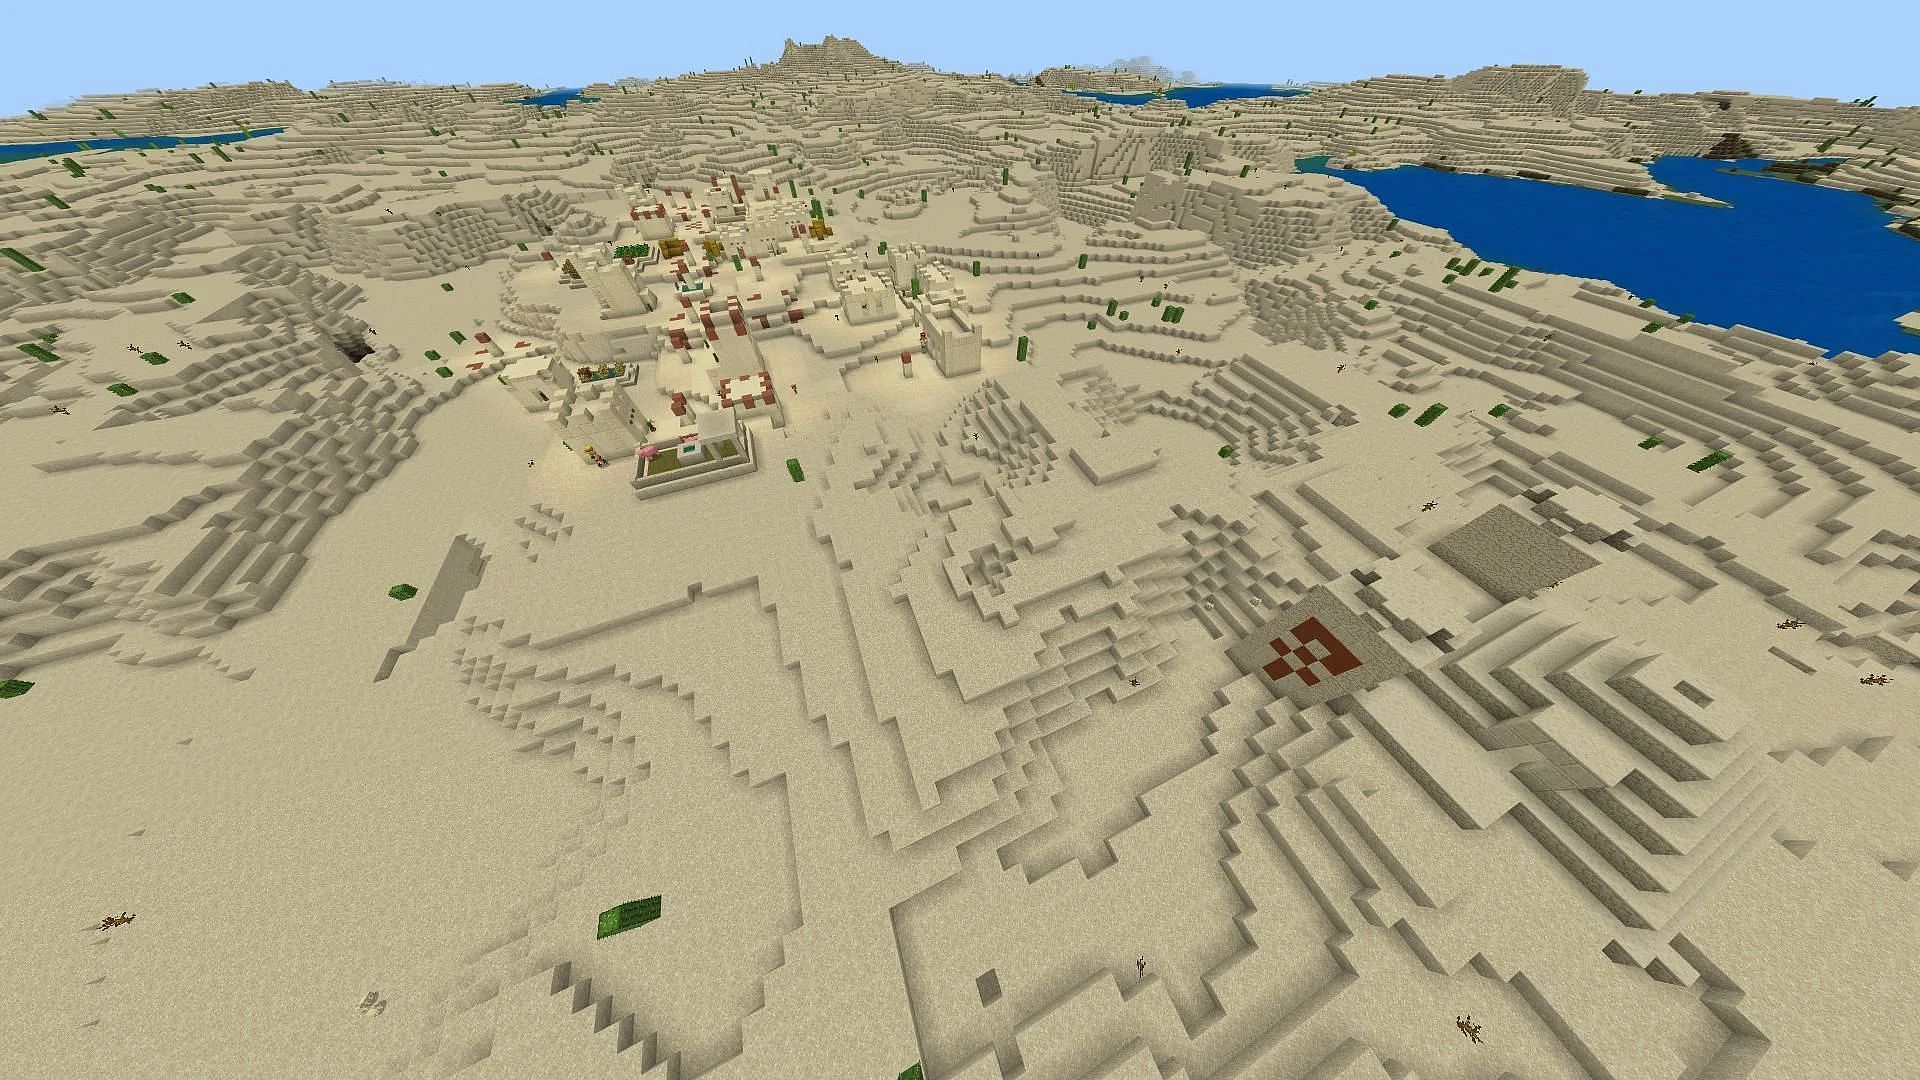 Structures abound in the spawn desert biome of this Minecraft Bedrock seed (Image via Mojang)